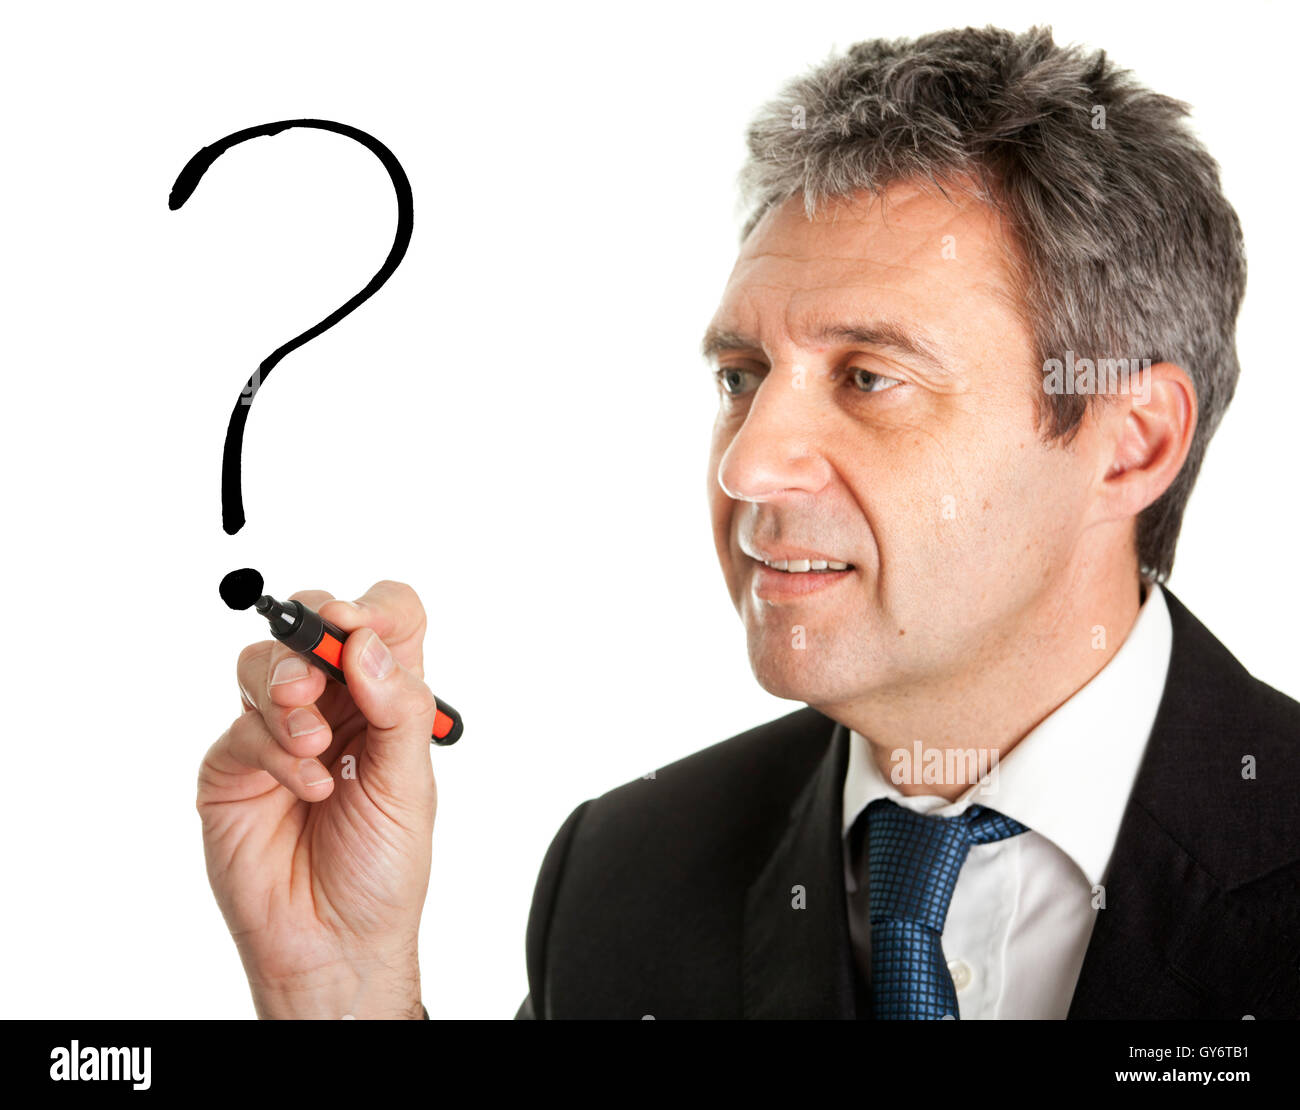 Businessman drawing a question mark Stock Photo